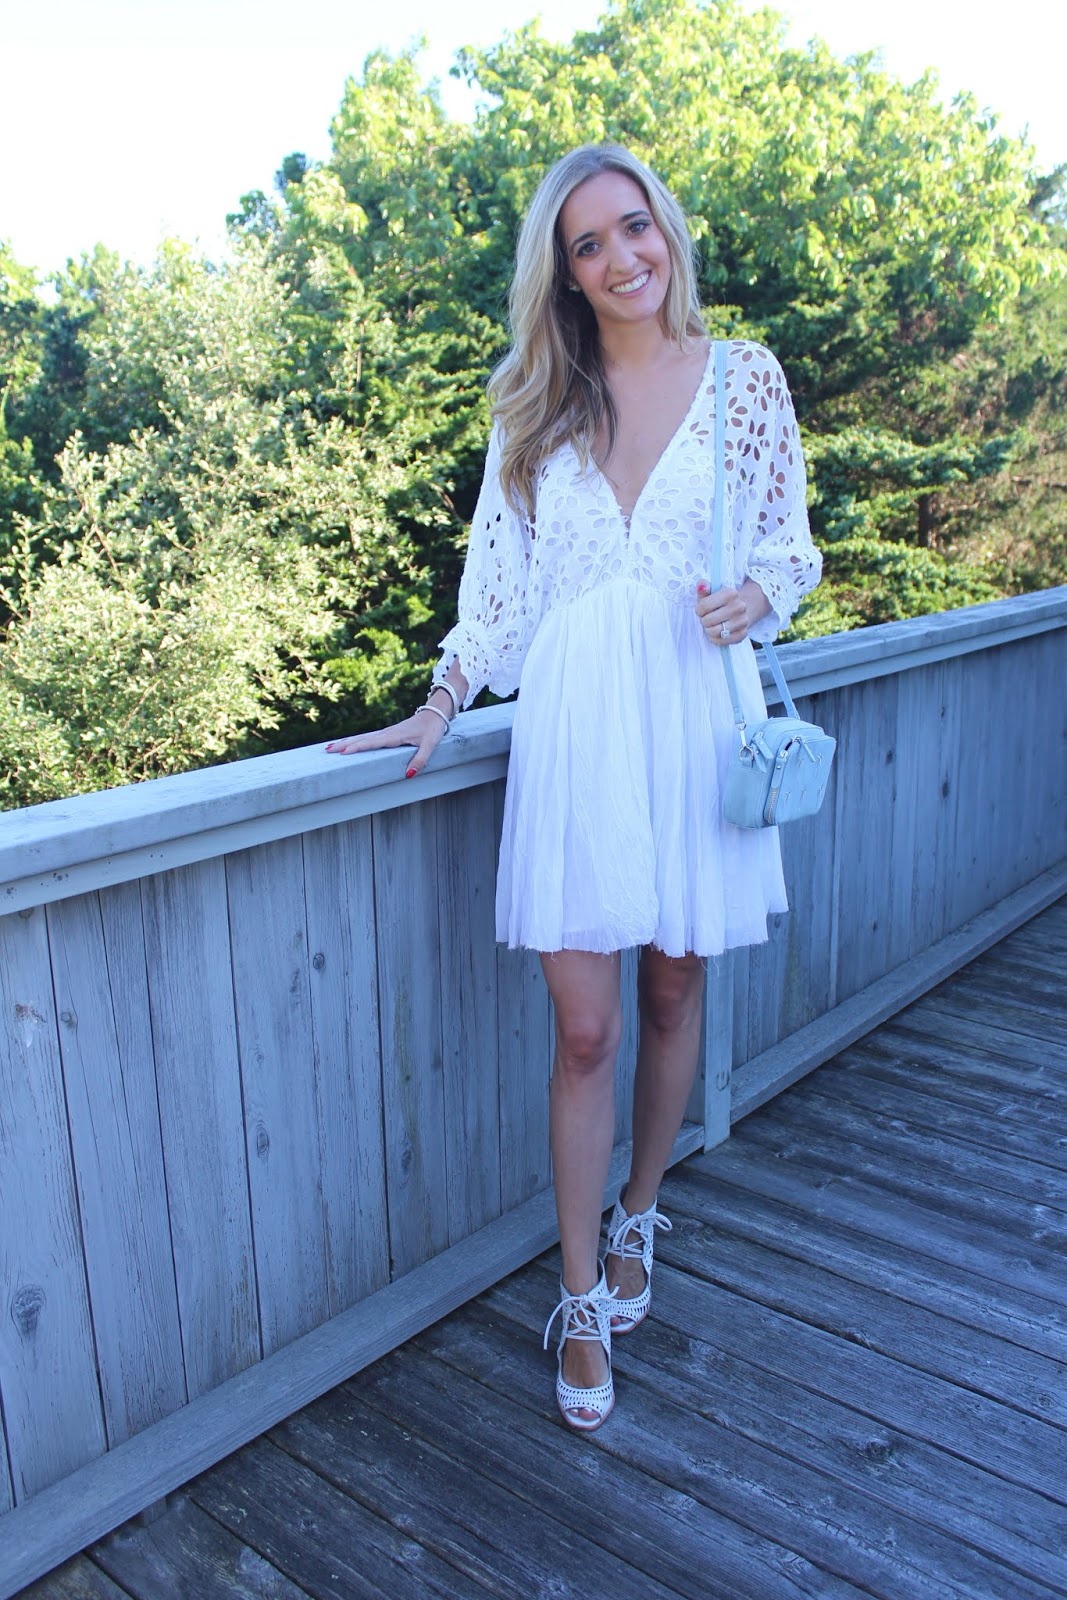 Michelle's Pa(i)ge | Fashion Blogger based in New York: ANOTHER WHITE ...